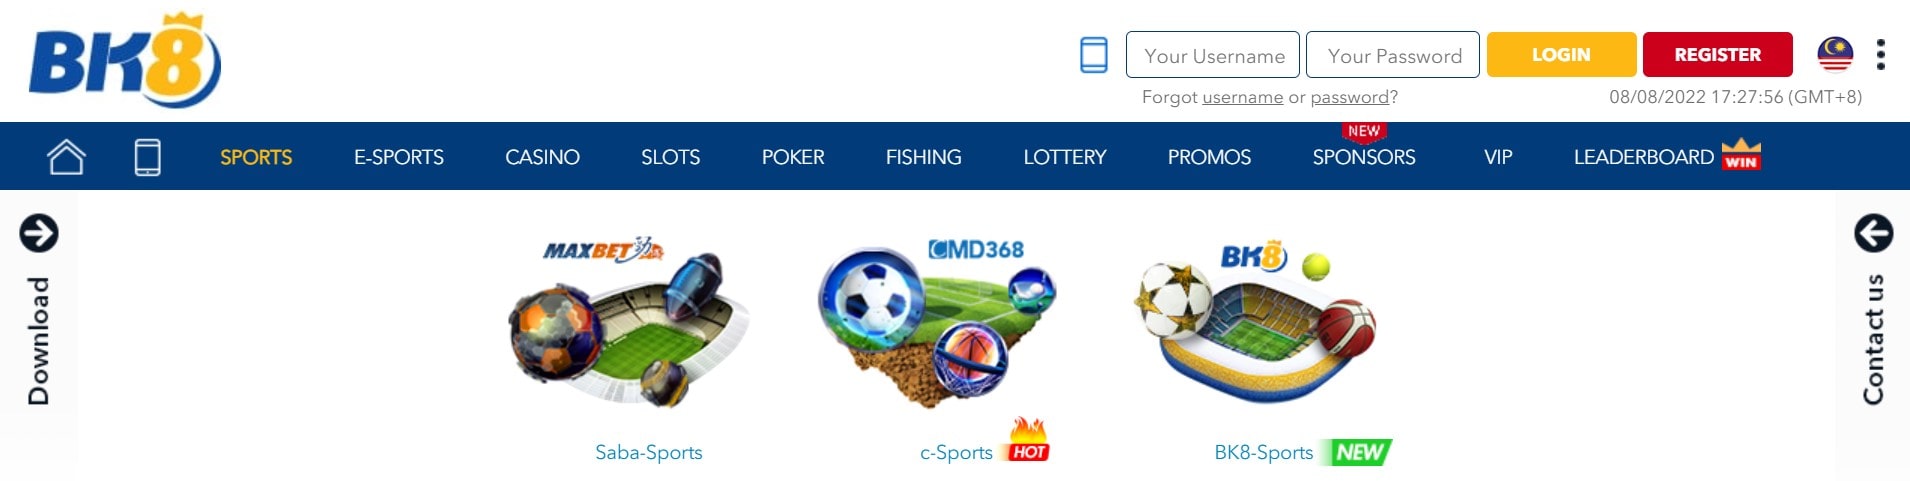 One of The Best Sports Betting Platforms in Malaysia